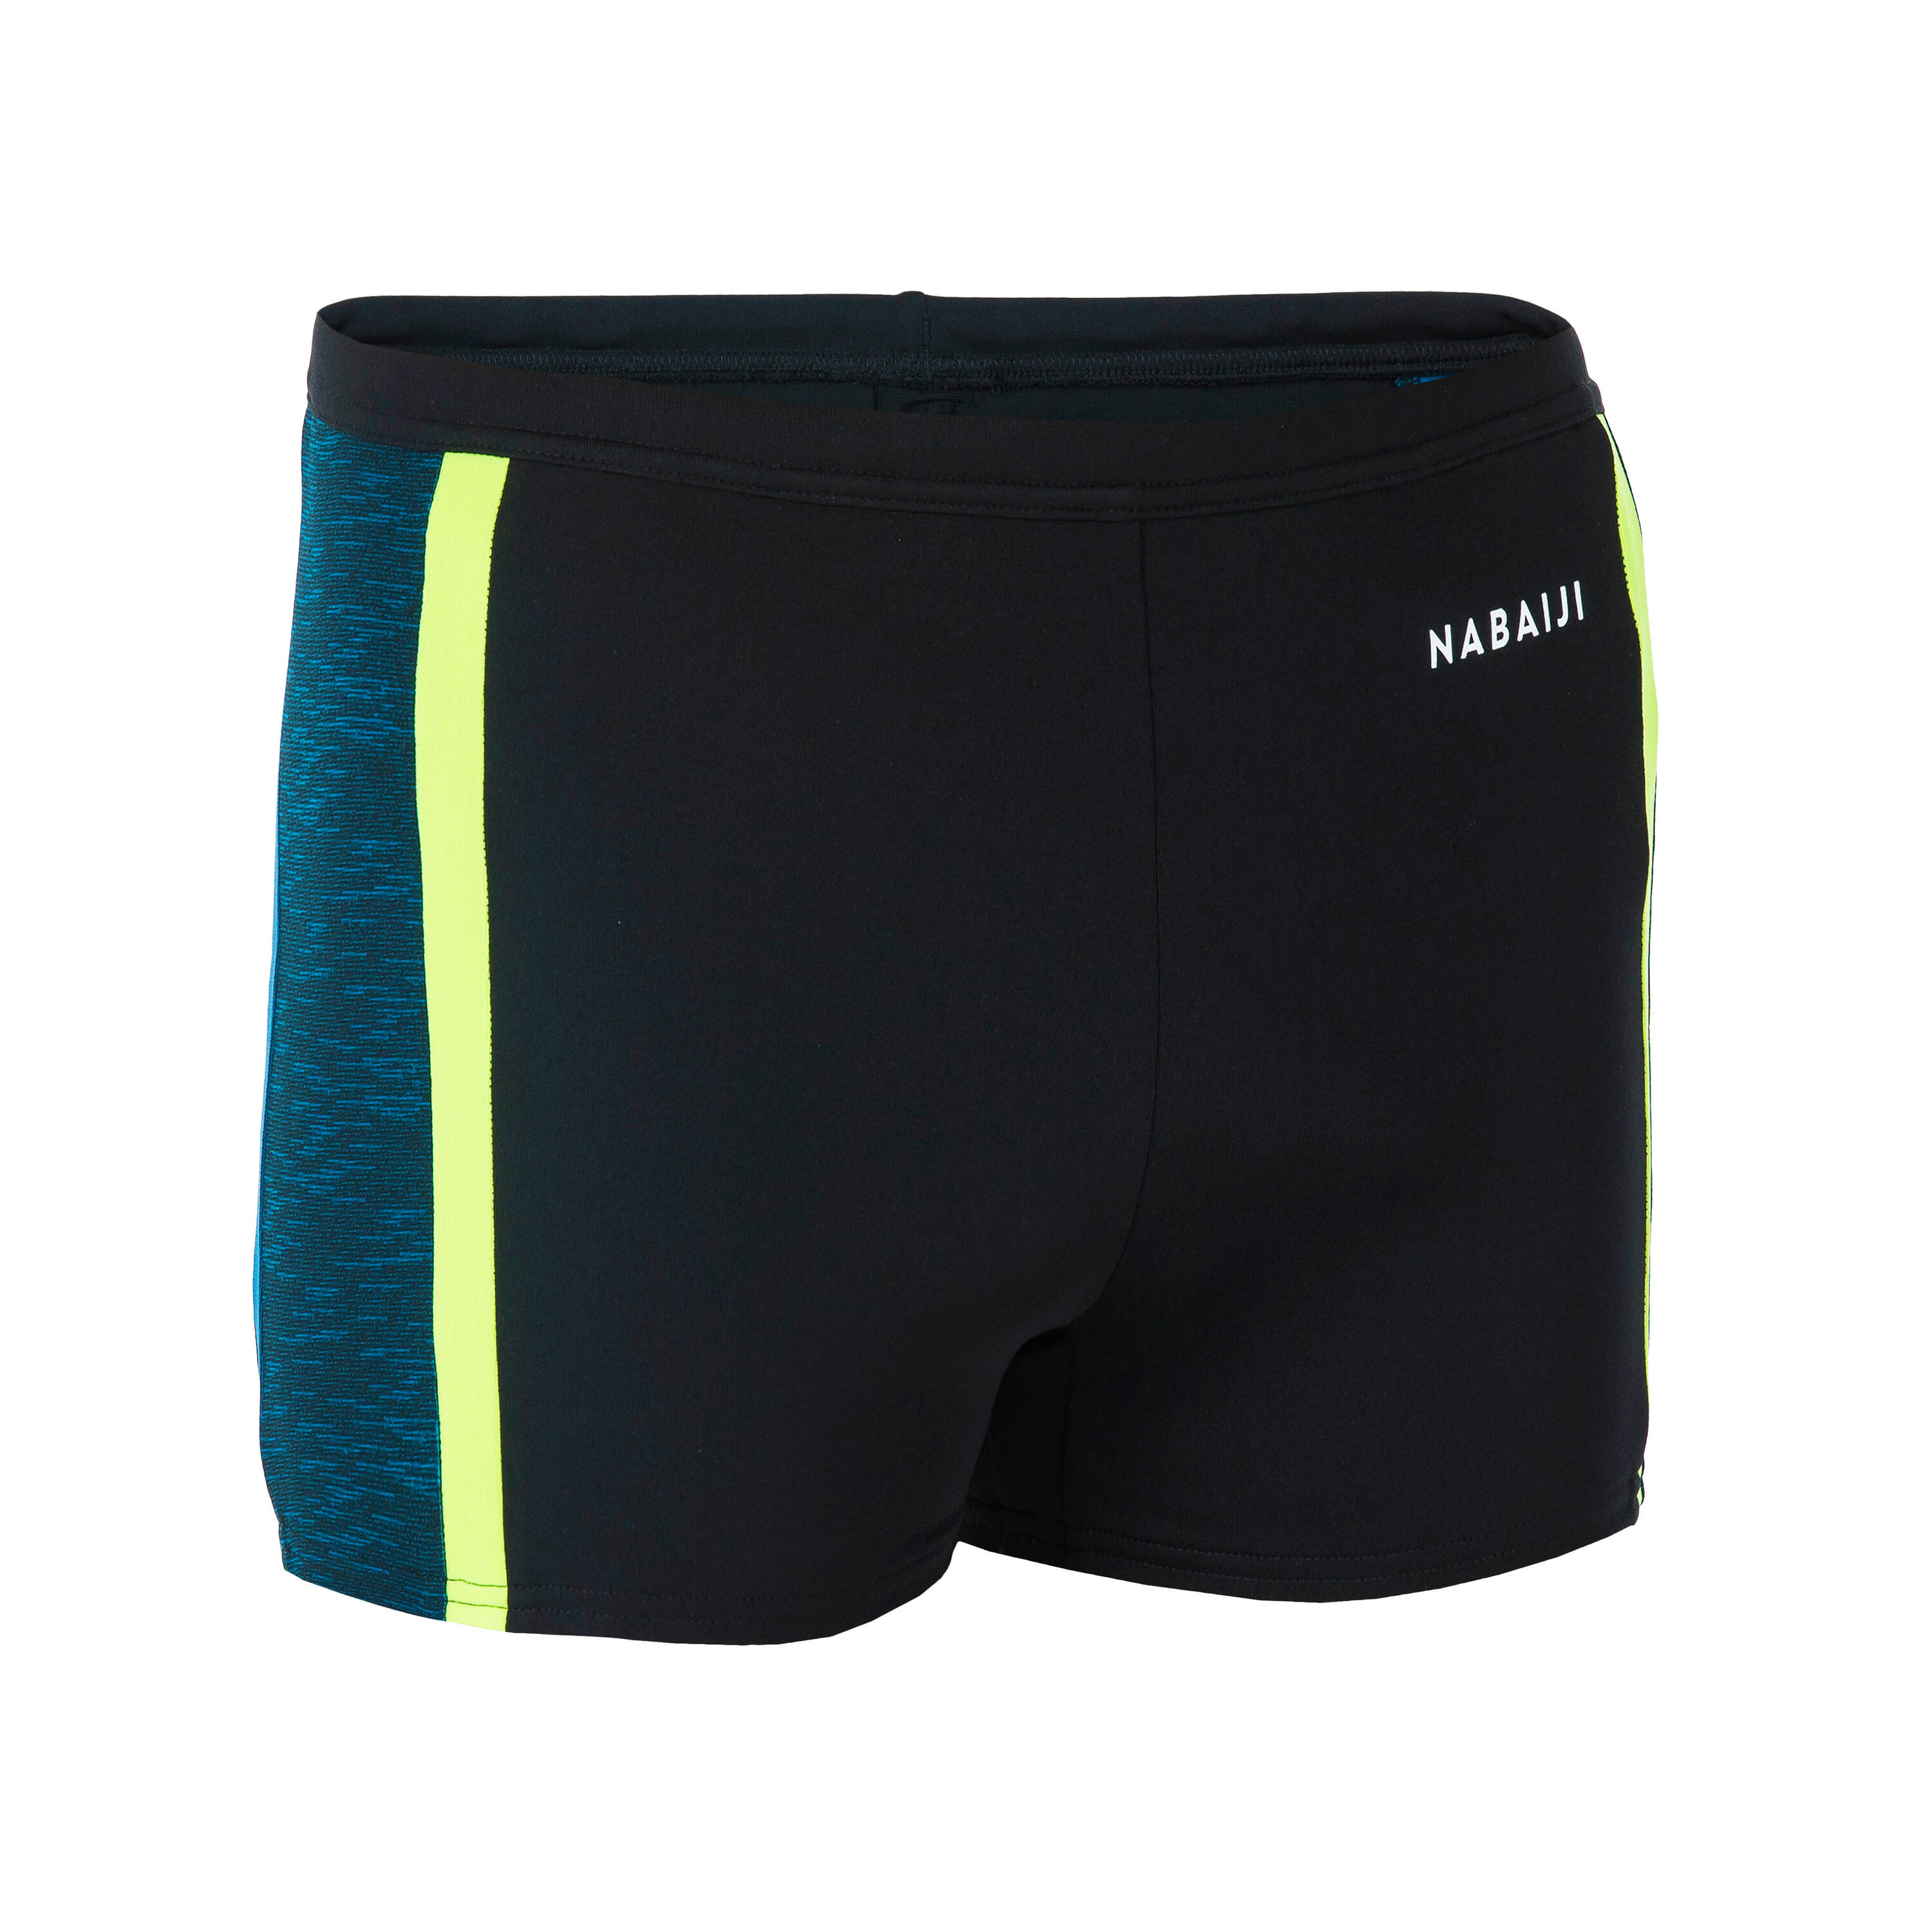 Mens Swim Briefs and Jammers